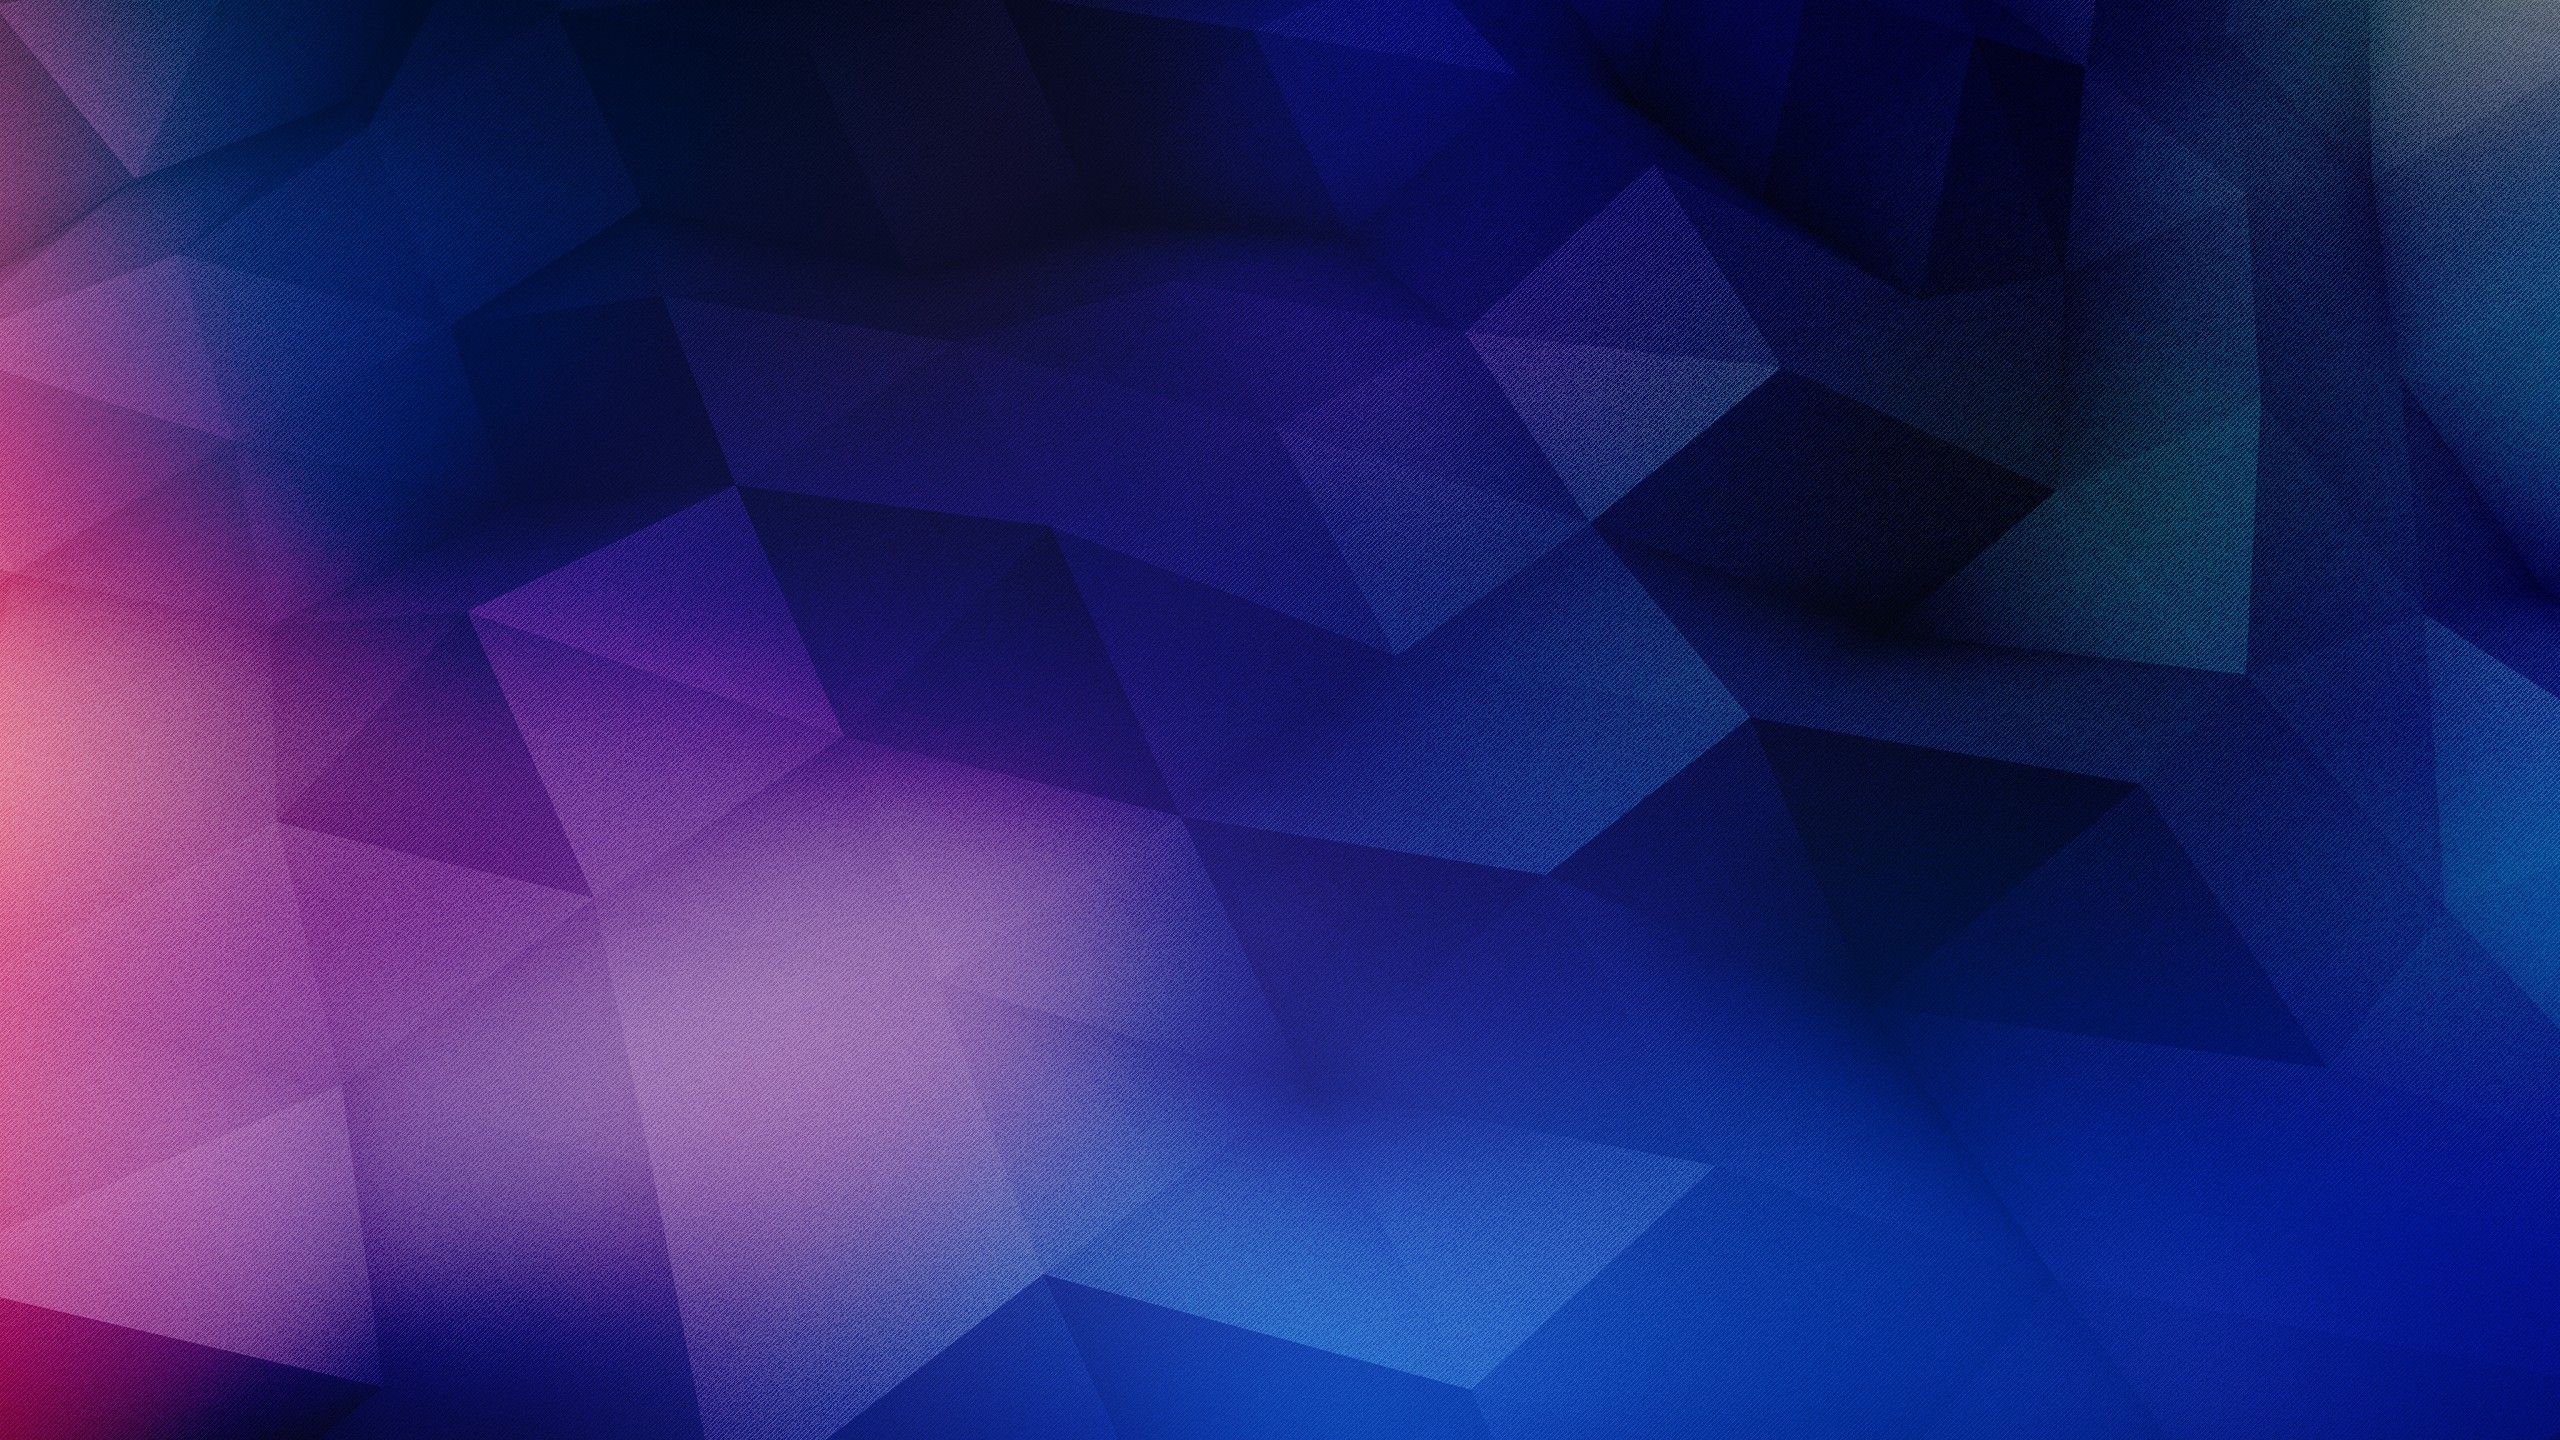 A blue and purple geometric abstract wallpaper - Low poly, 2560x1440